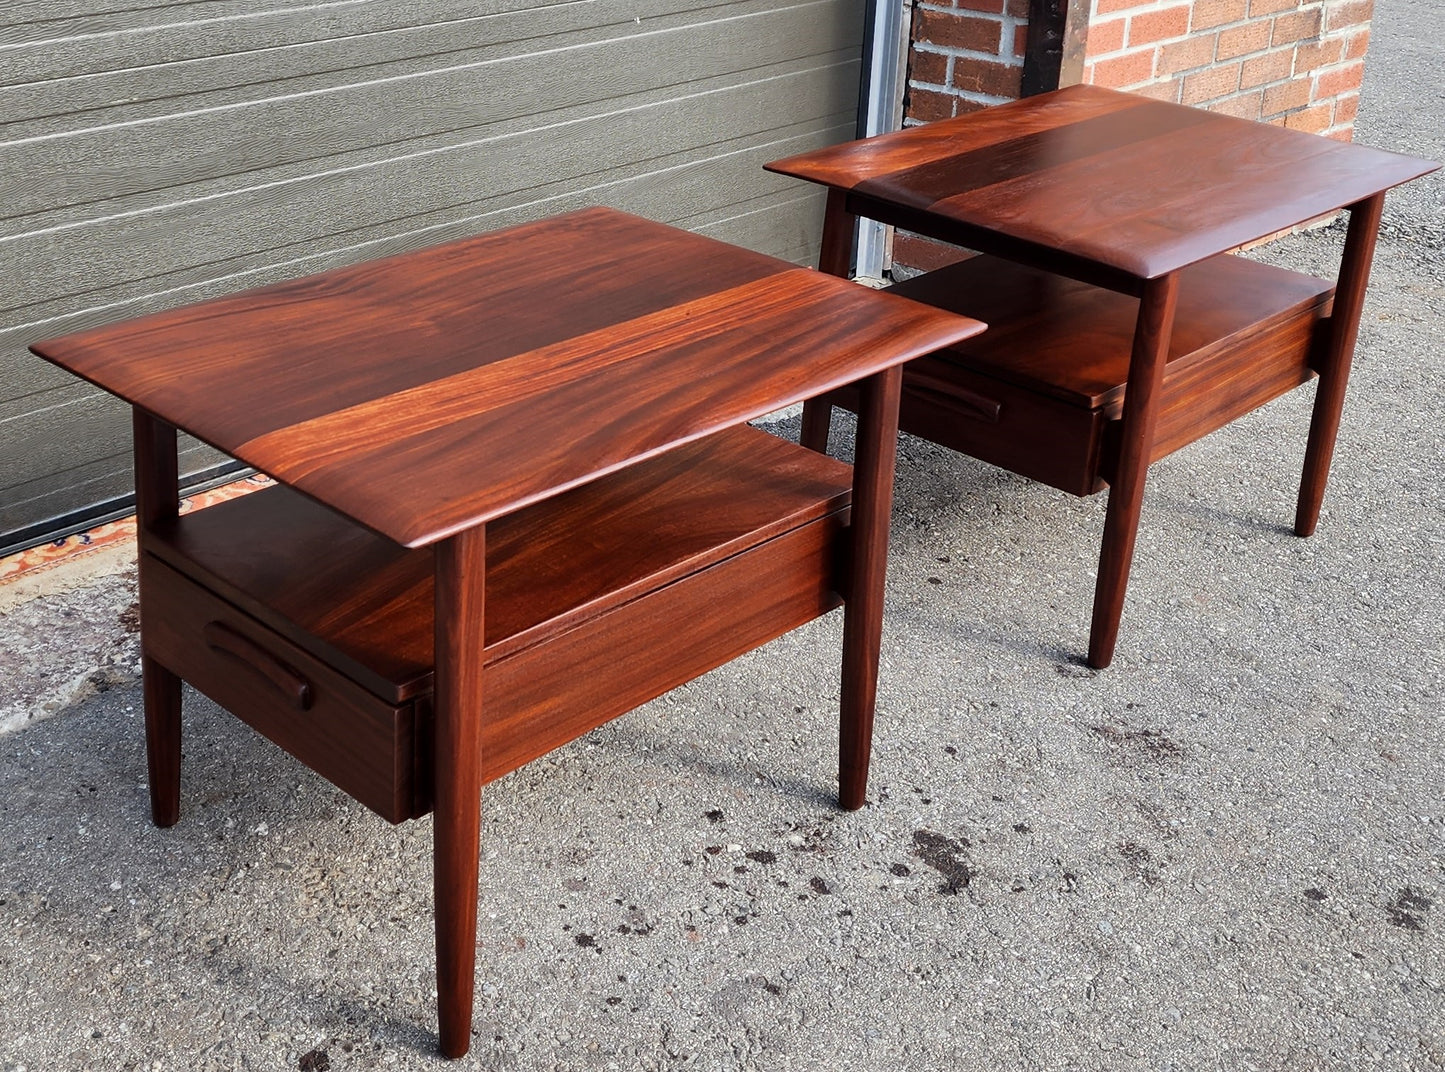 Coming***REFINISHED Mid Century Modern Solid Teak Side Table w Drawers by Imperial (2 available)